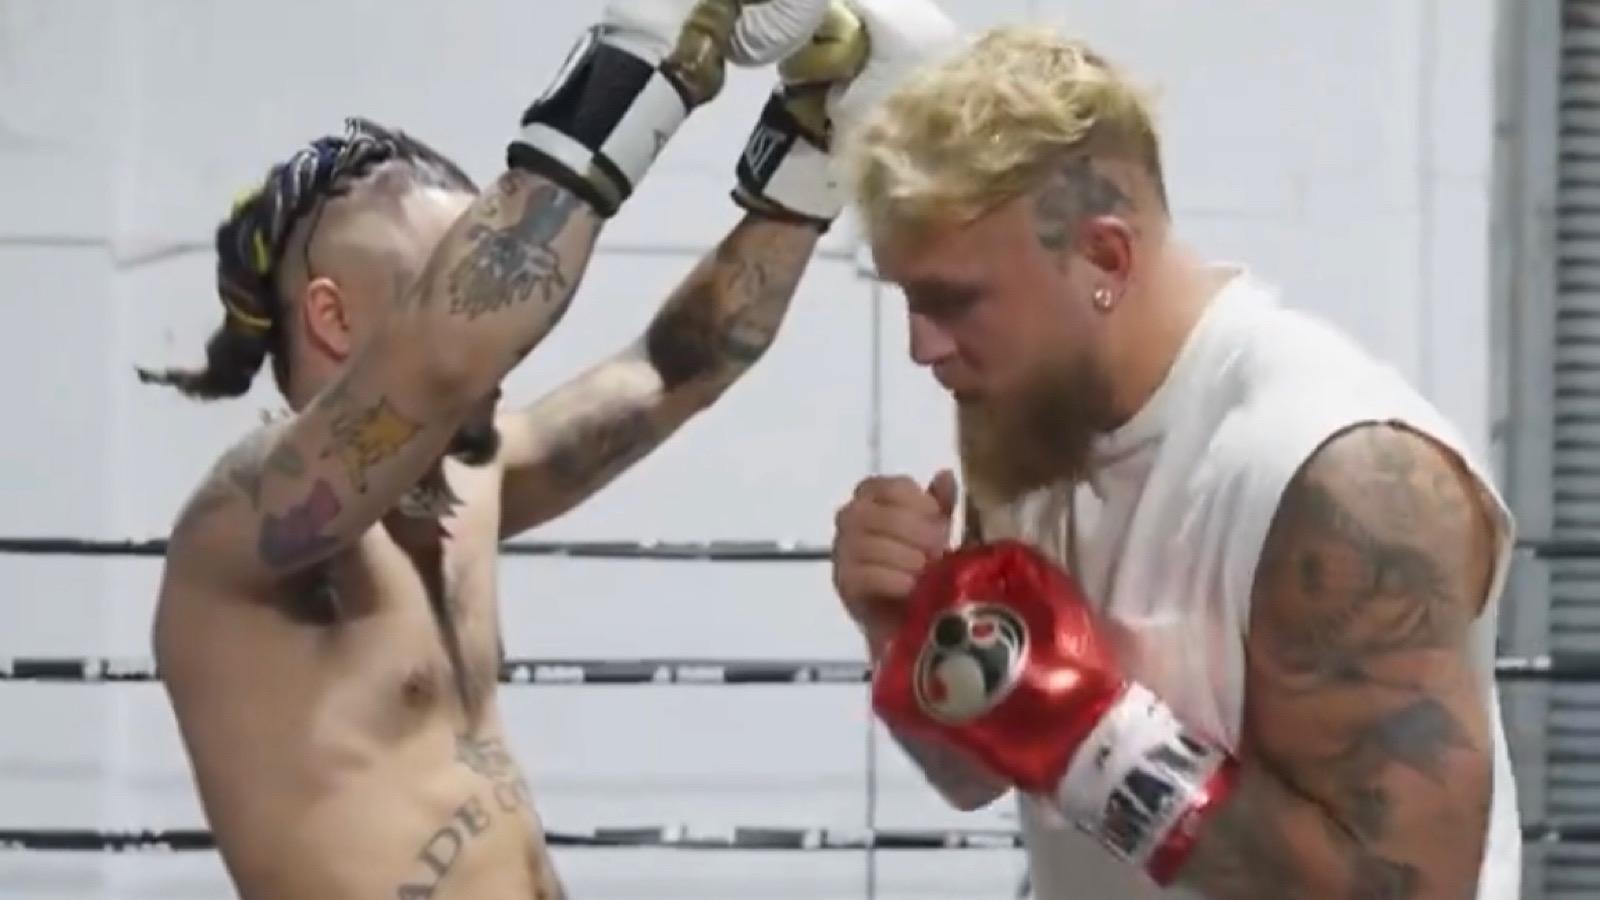 jake Paul punches lil pump